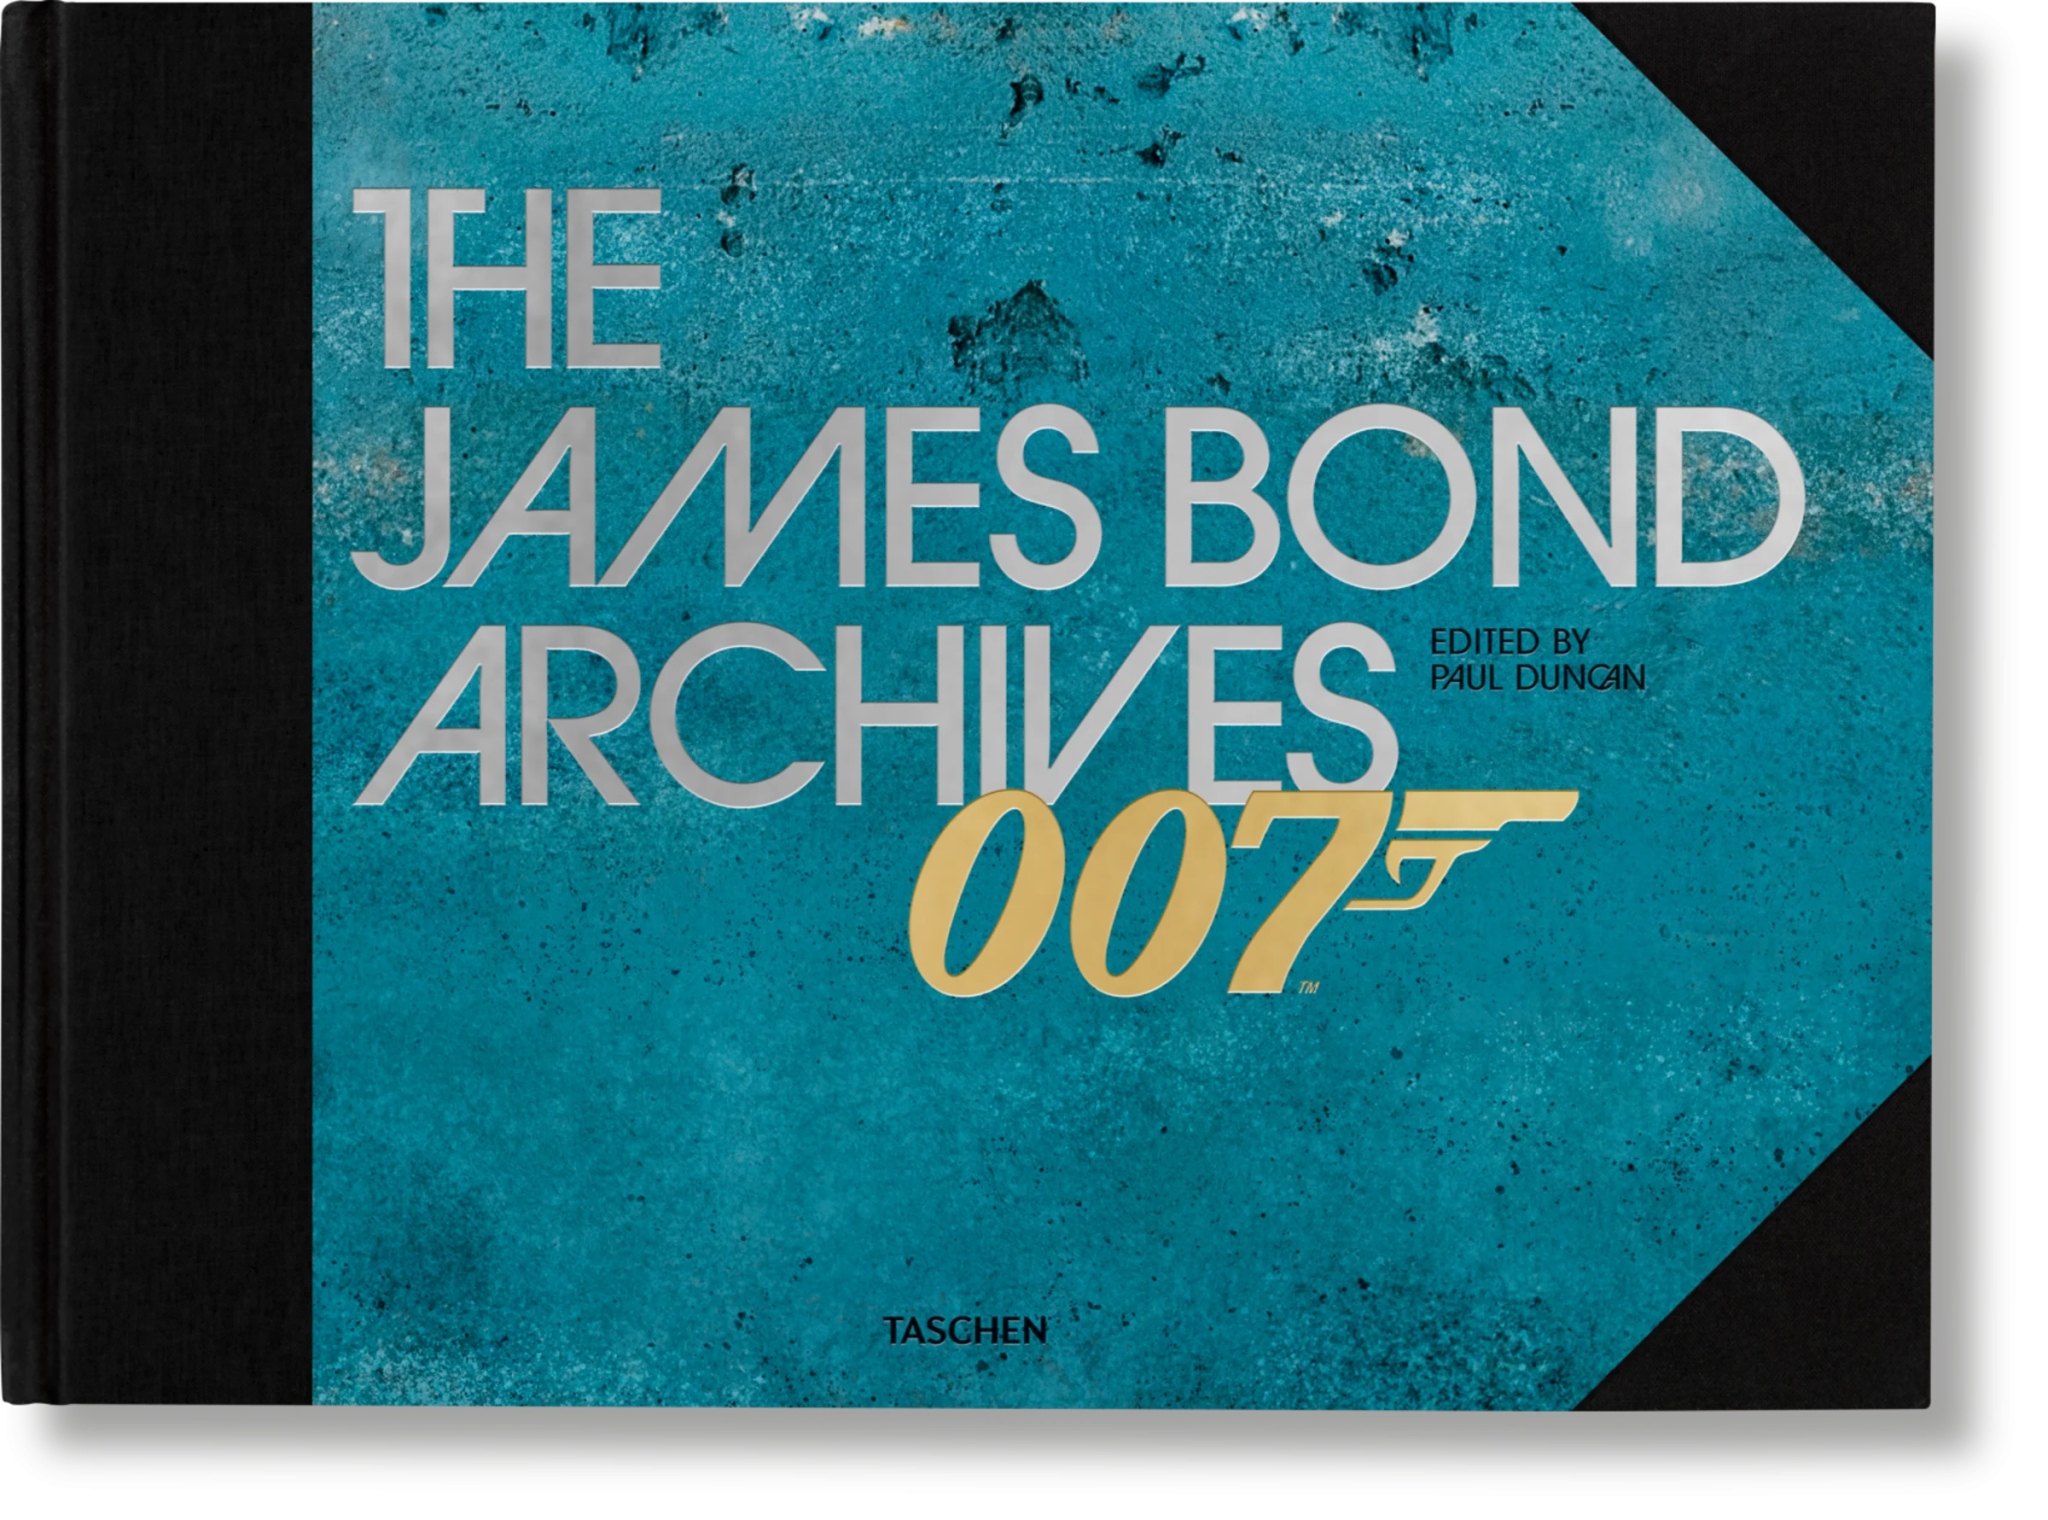 The James Bond 007 Archives. "No Time to Die" Edition - Joy